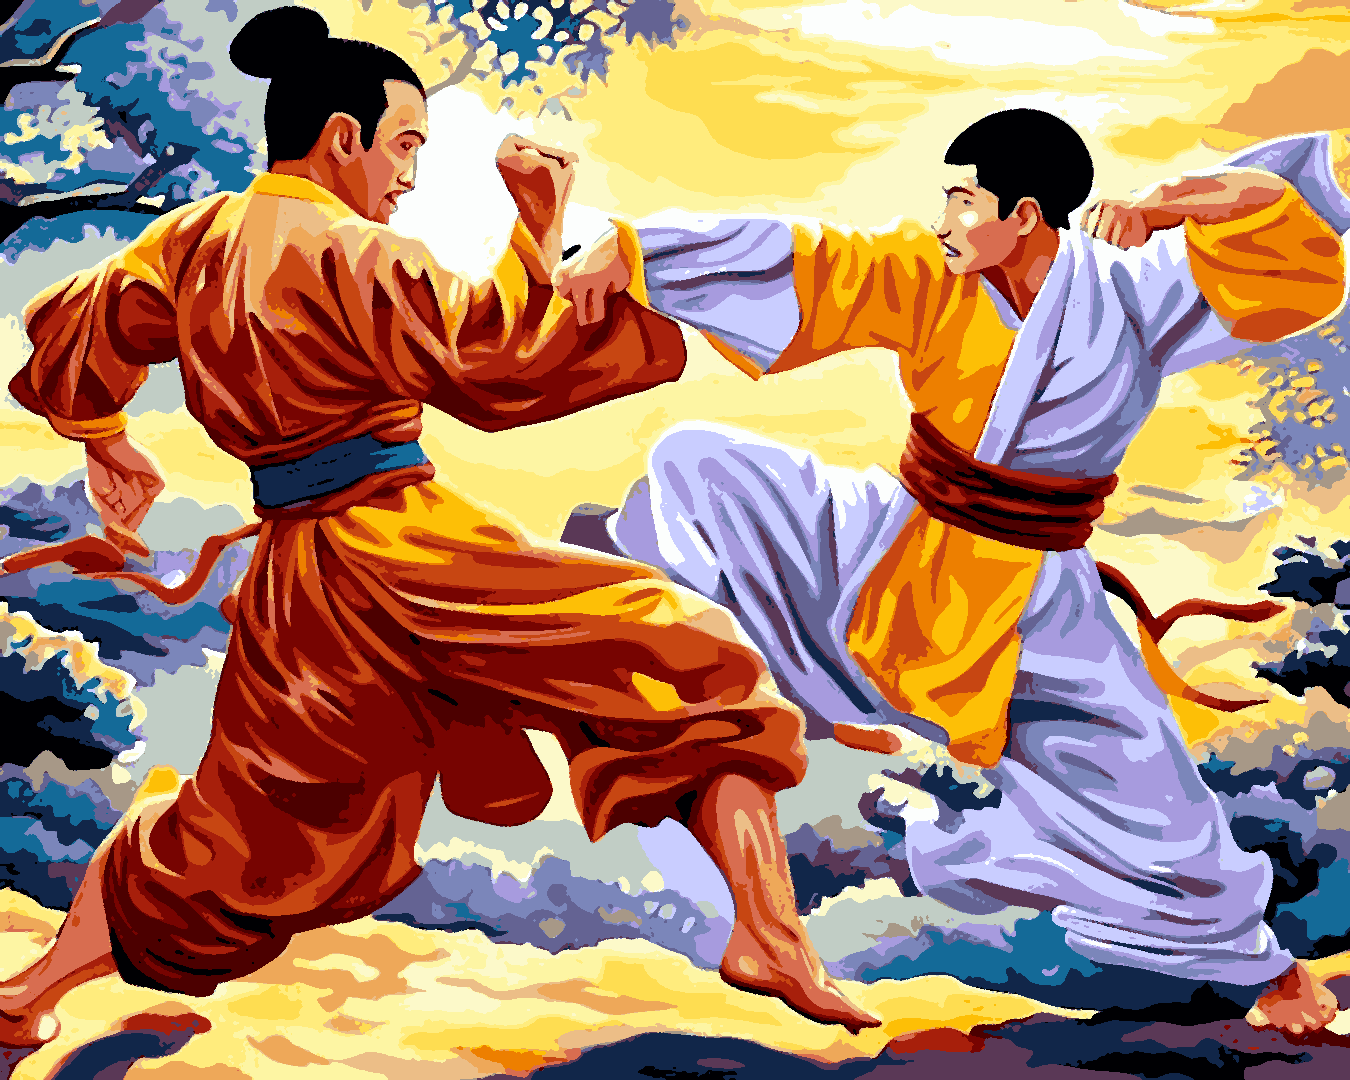 Shaolin kung fu (6) - Van-Go Paint-By-Number Kit